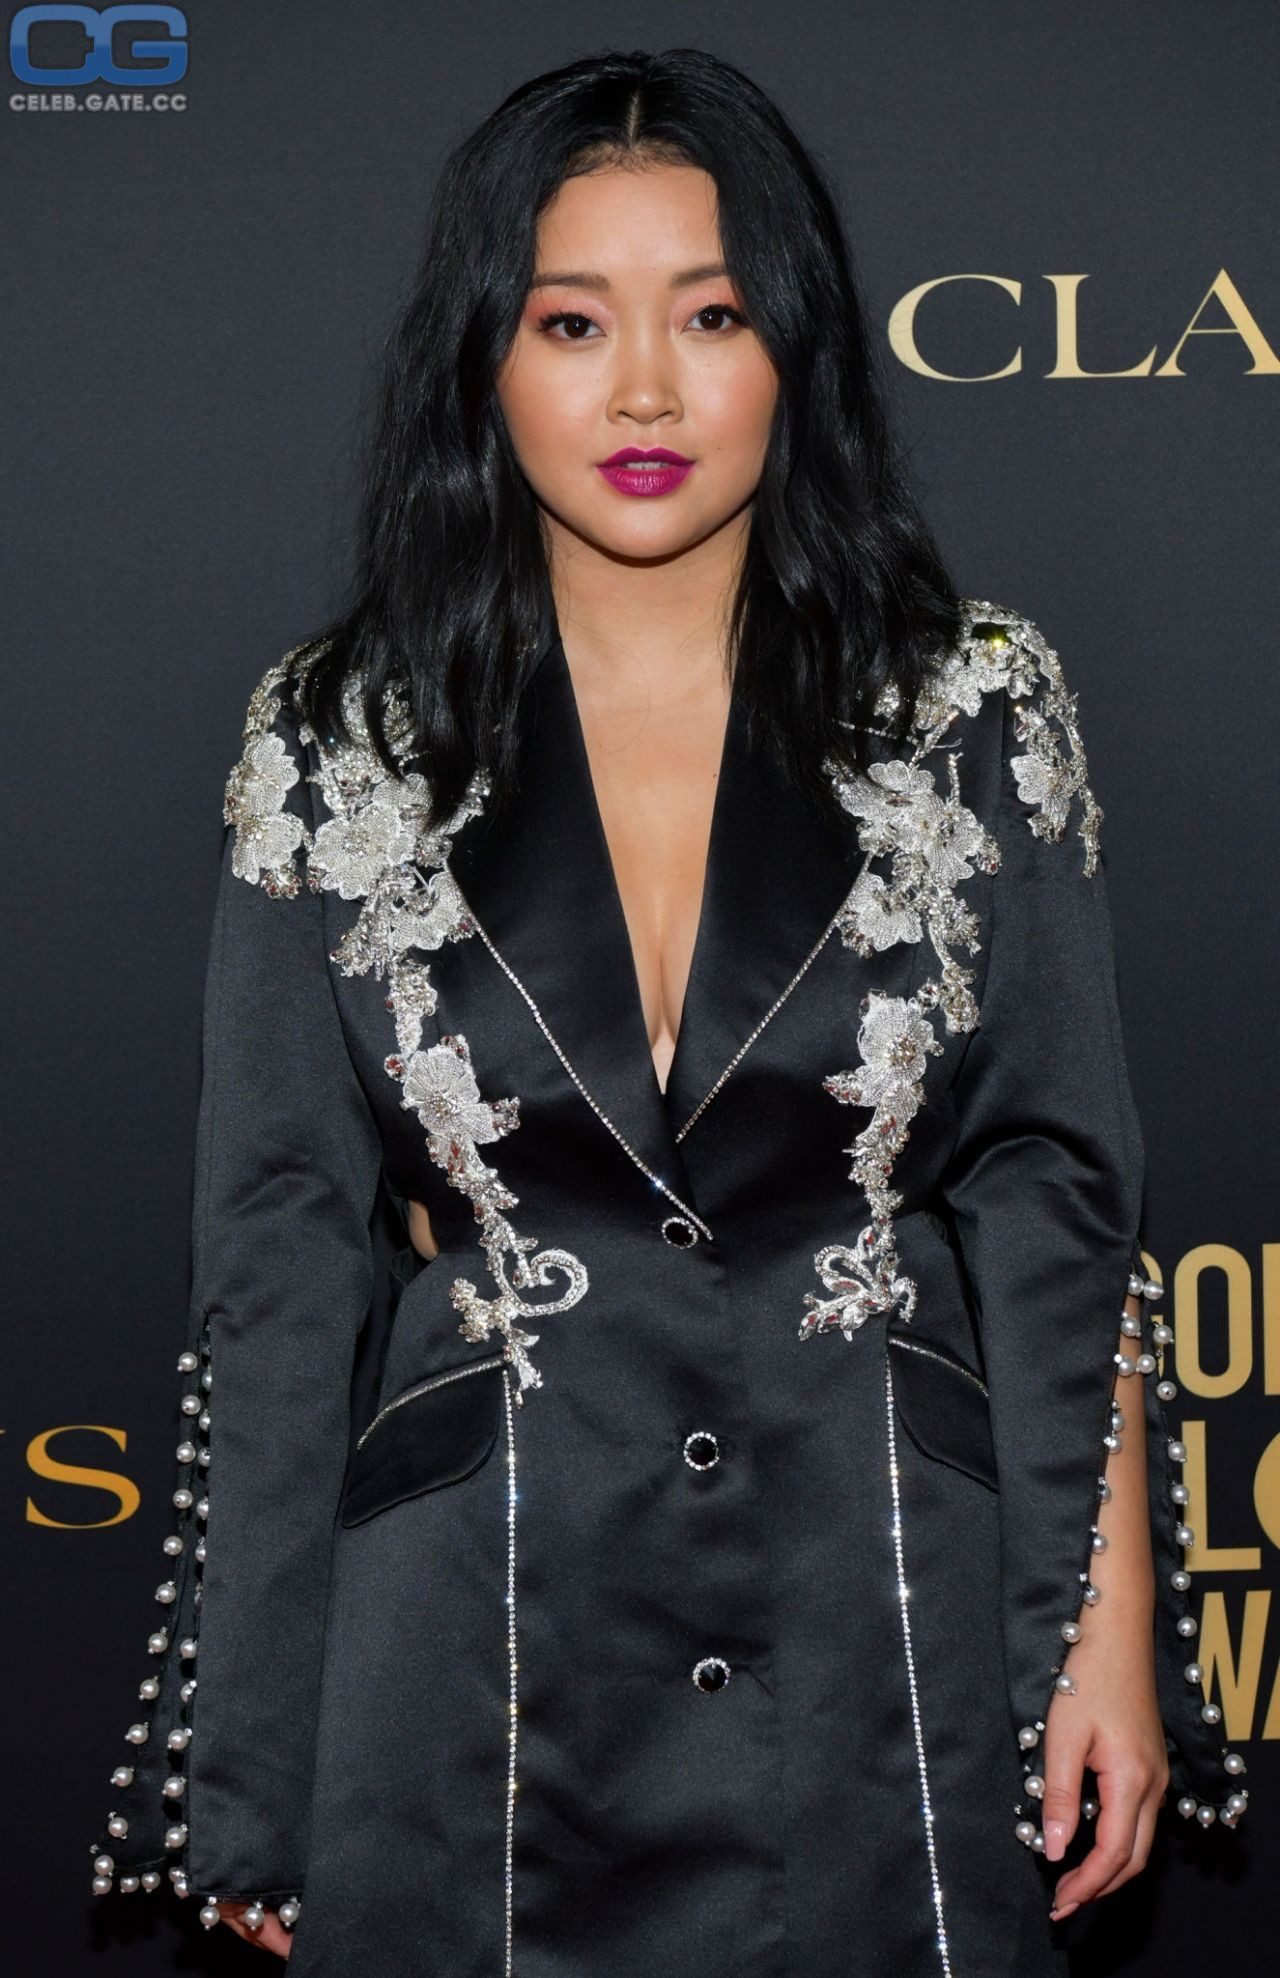 Lana Condor nude, pictures, photos, Playboy, naked, topless, fappening